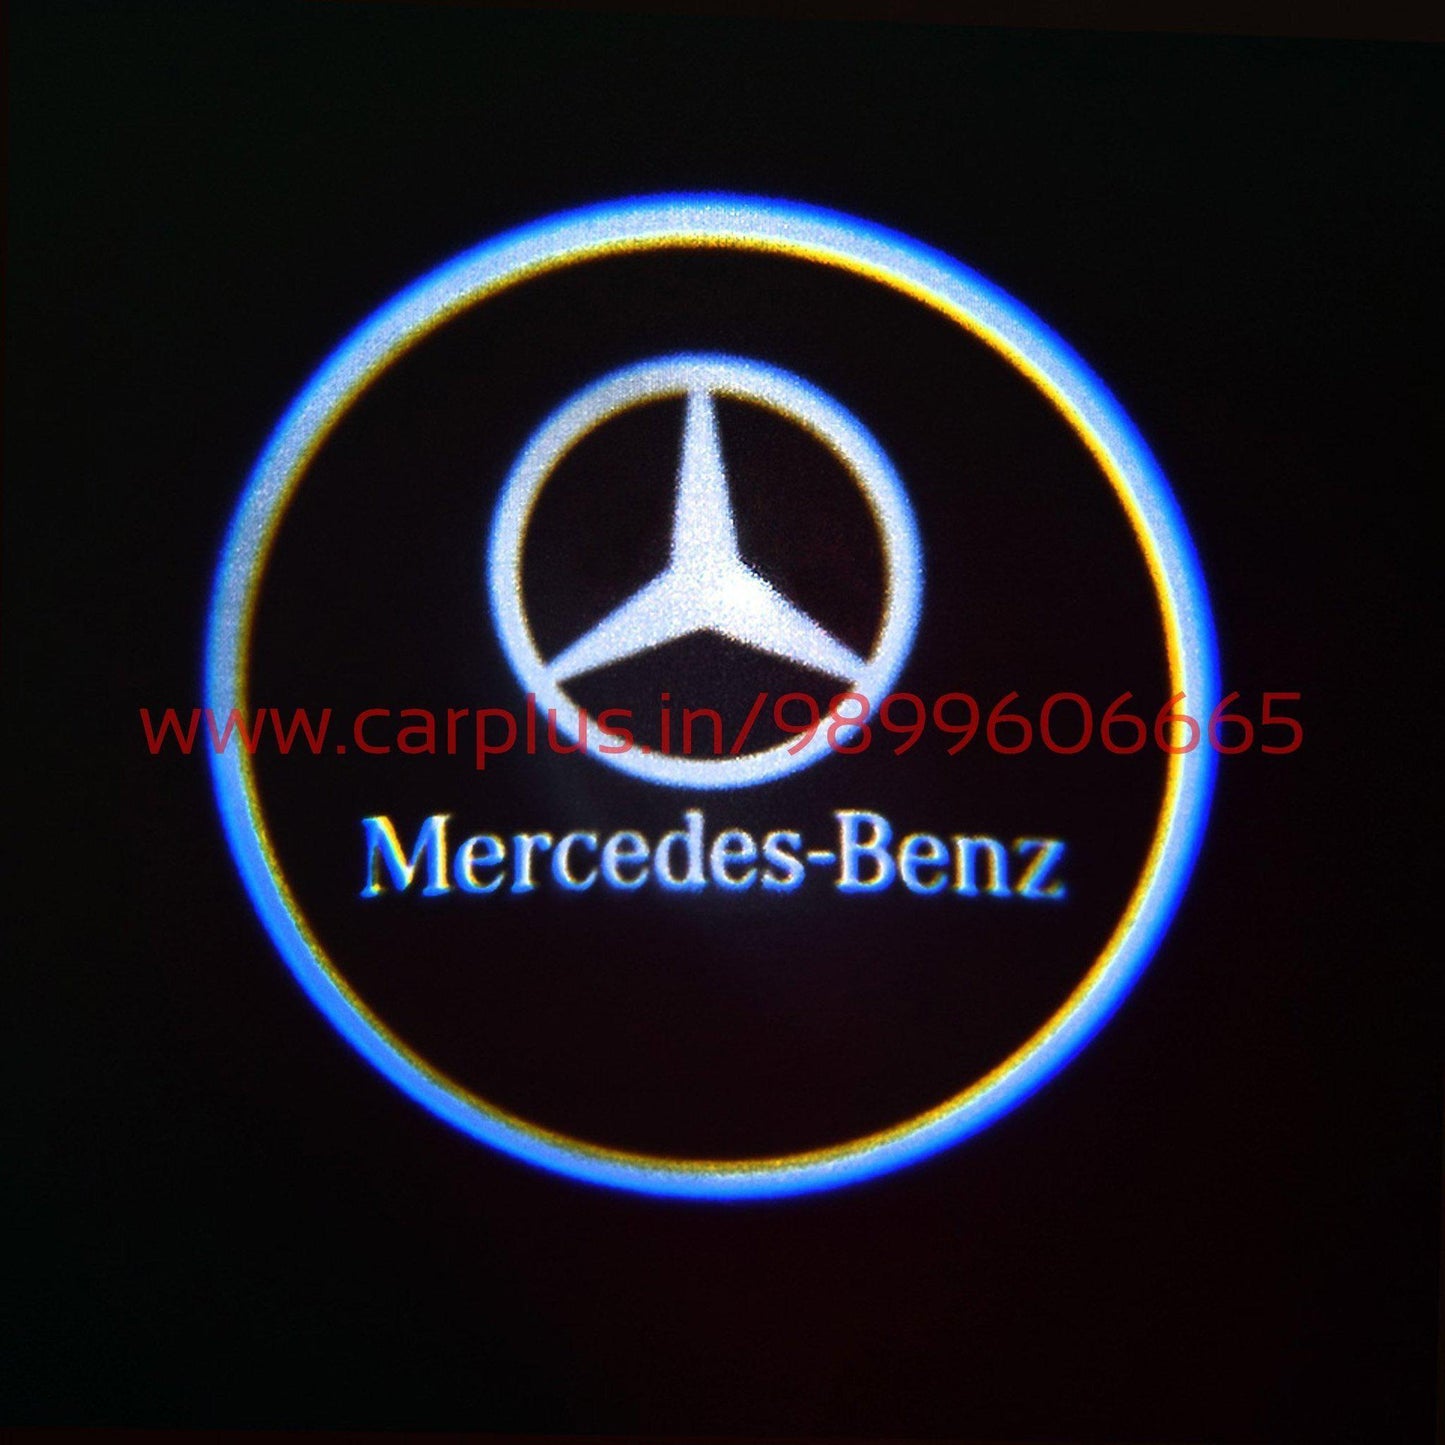 
                  
                    KMH Premium High Quality Ghost Shadow Light for Mercedes Benz (Set of 2pcs) KMH-GHOST SHADOW LIGHT GHOST SHADOW LIGHT.
                  
                